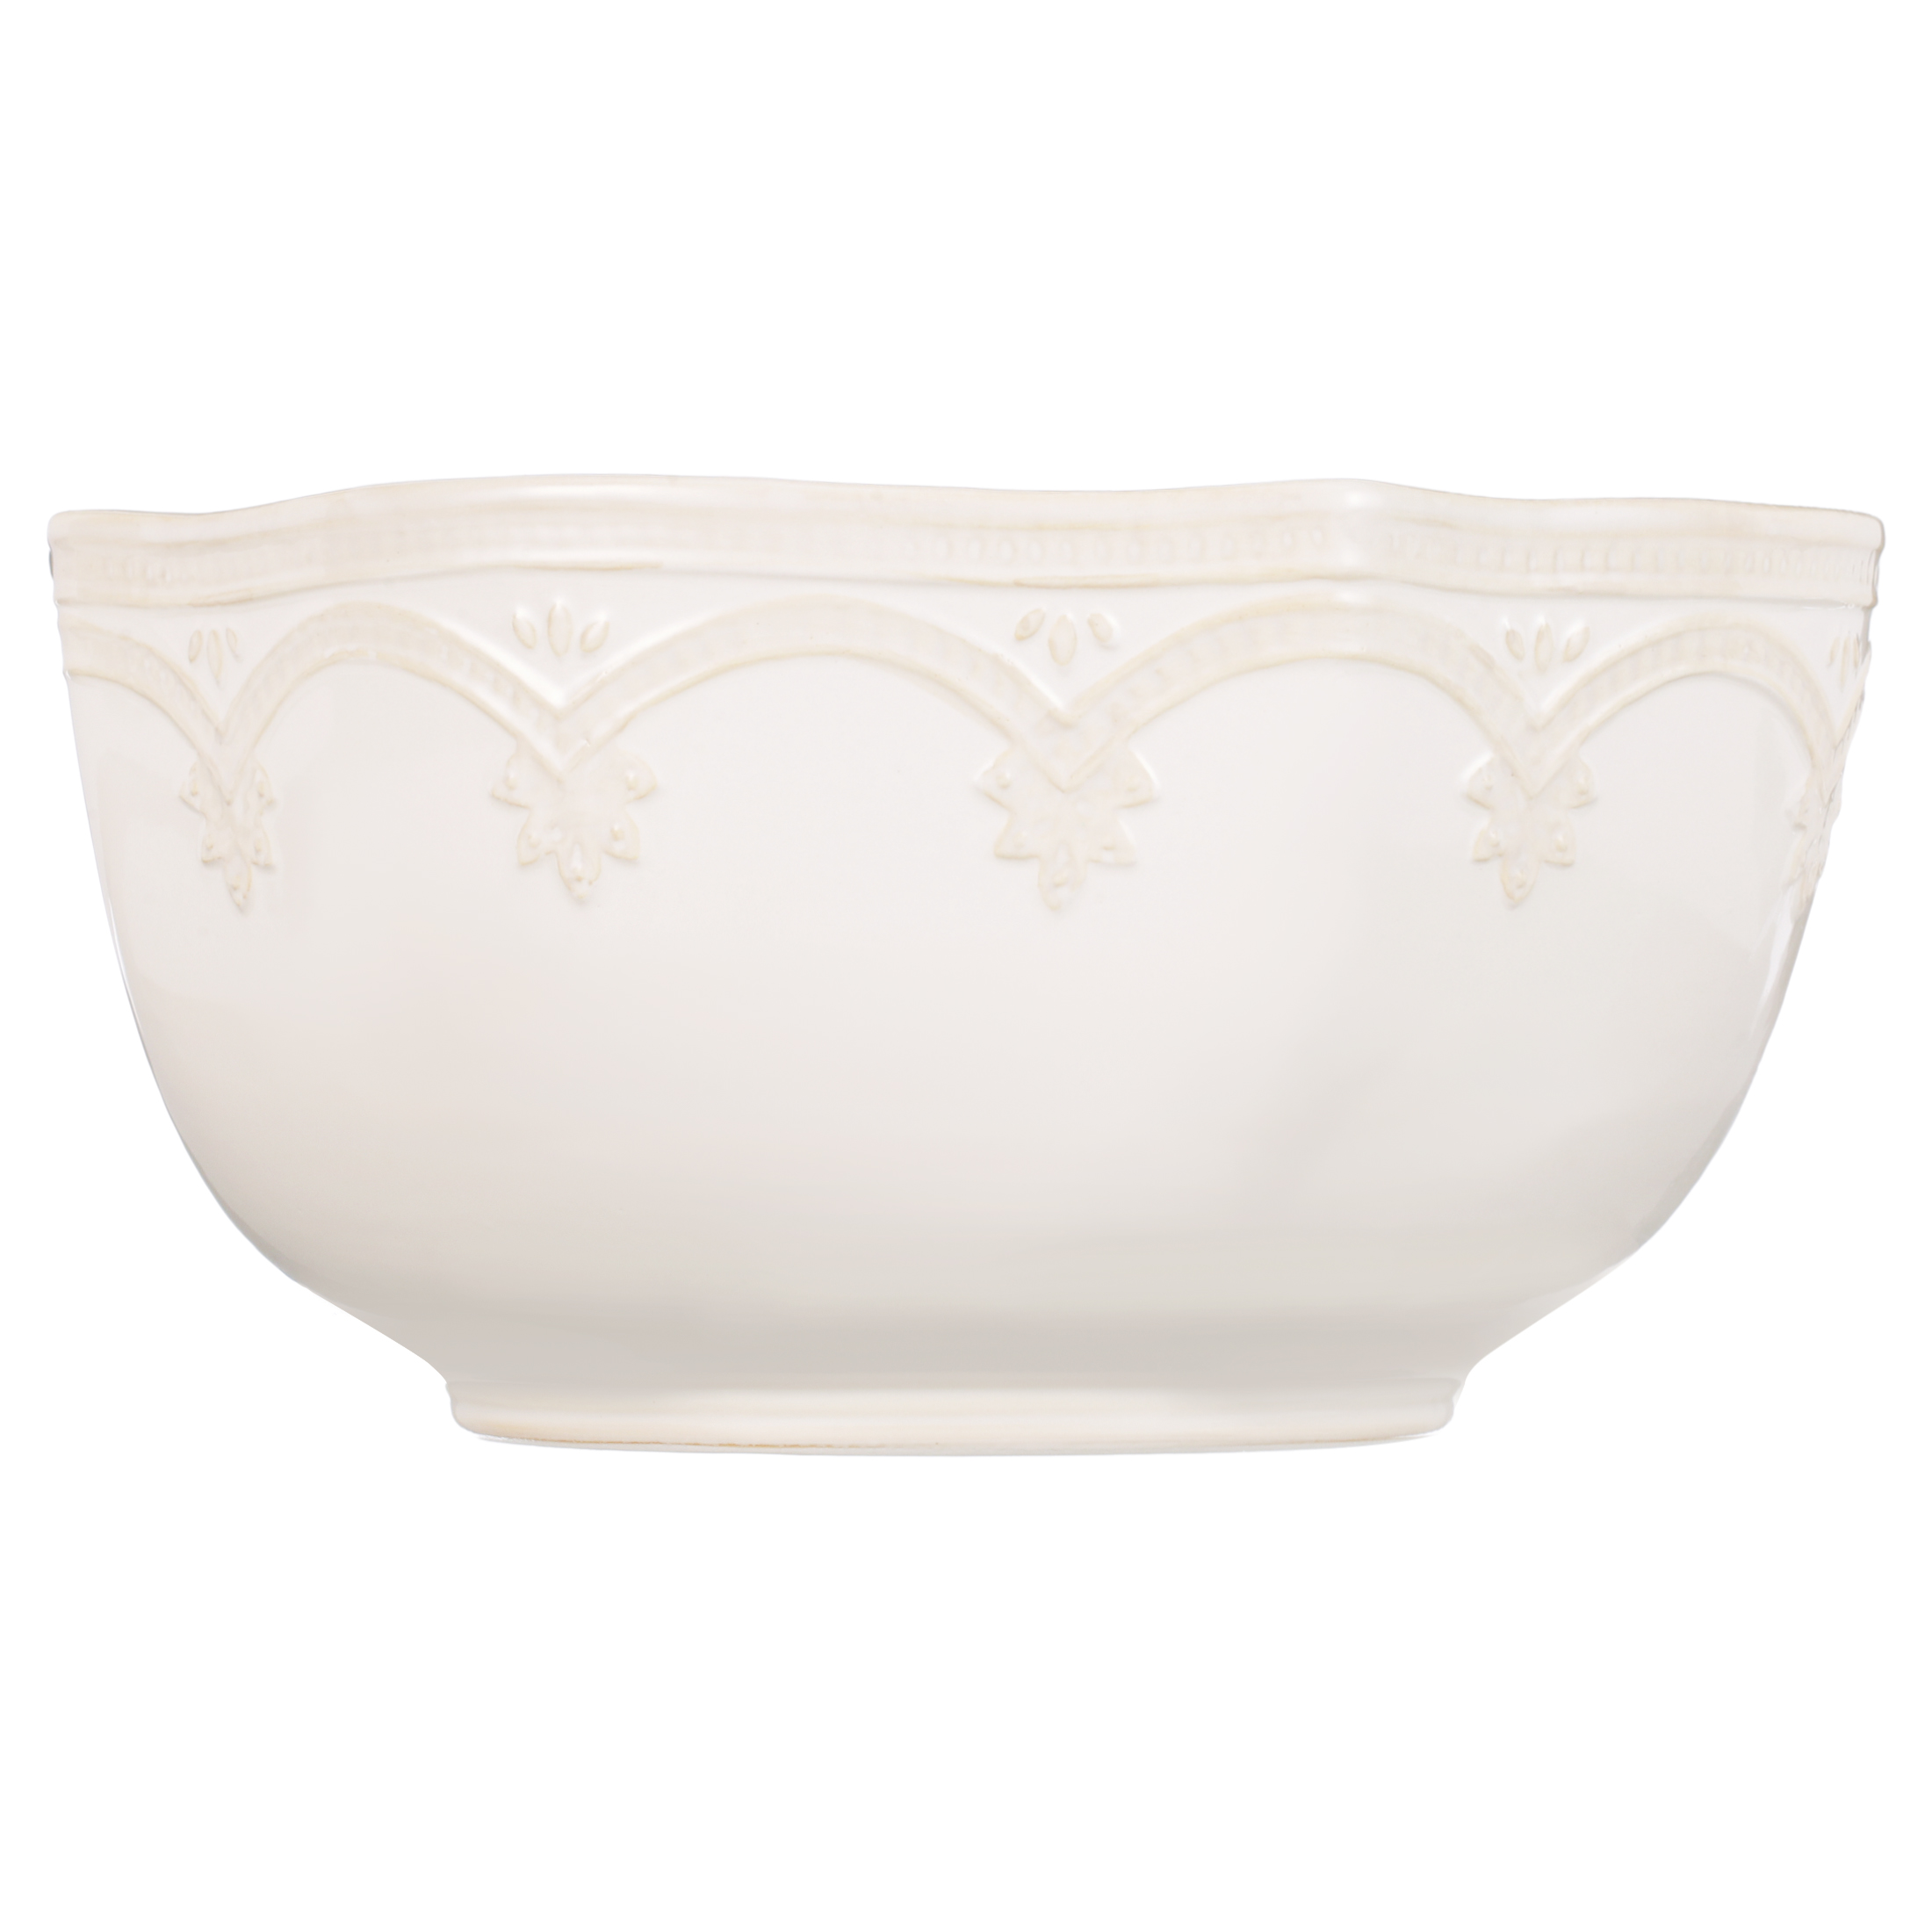 The Pioneer Woman Farmhouse Lace 10-Inch Serving Bowl, Linen - image 5 of 9